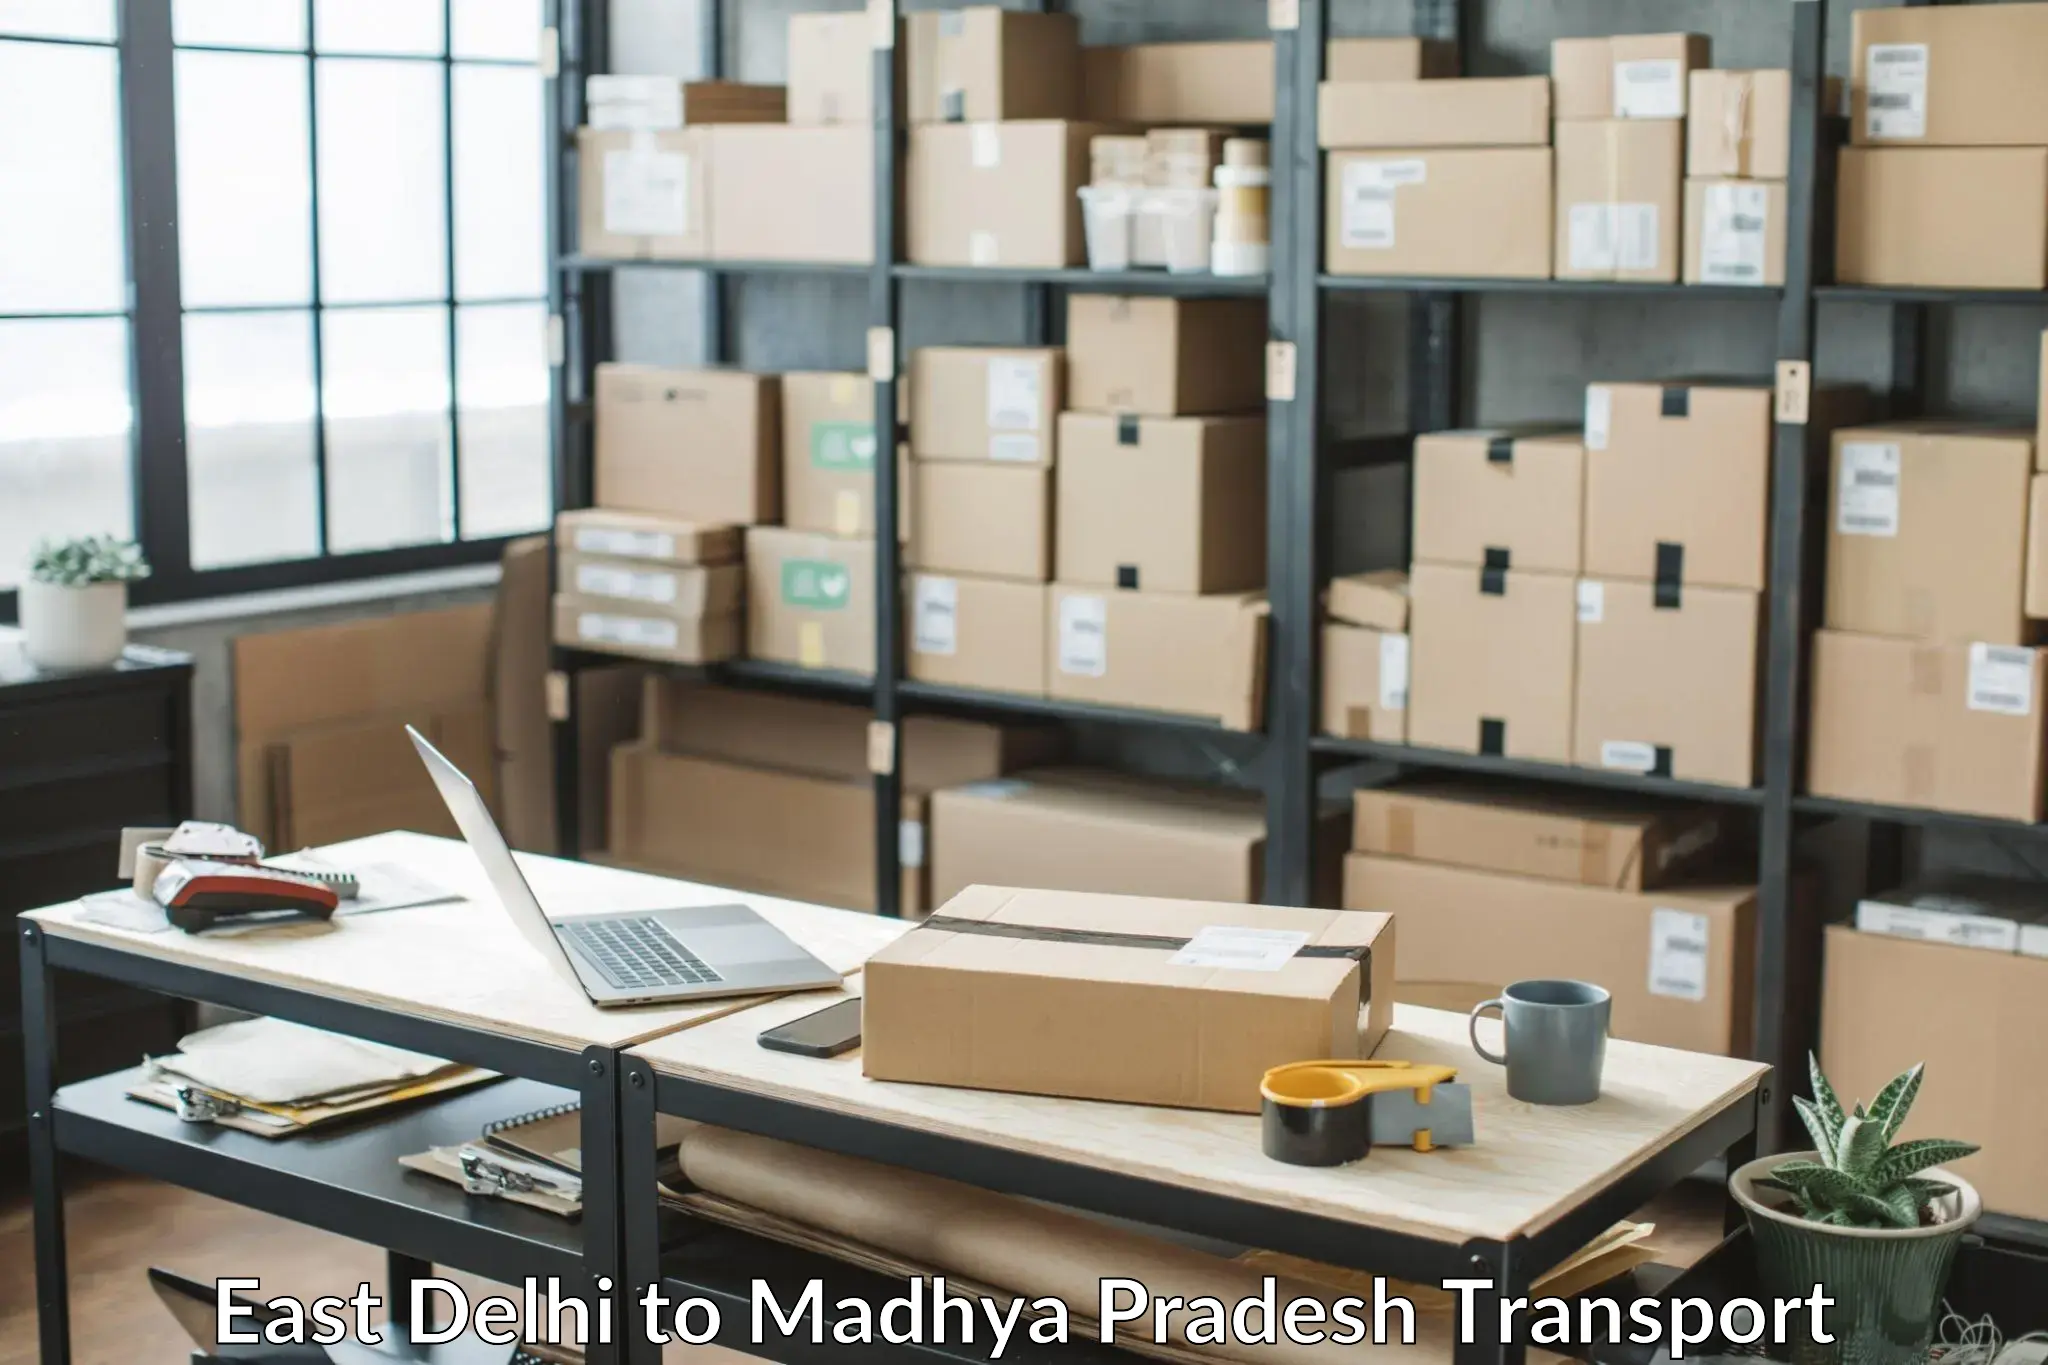 Goods delivery service East Delhi to Sausar